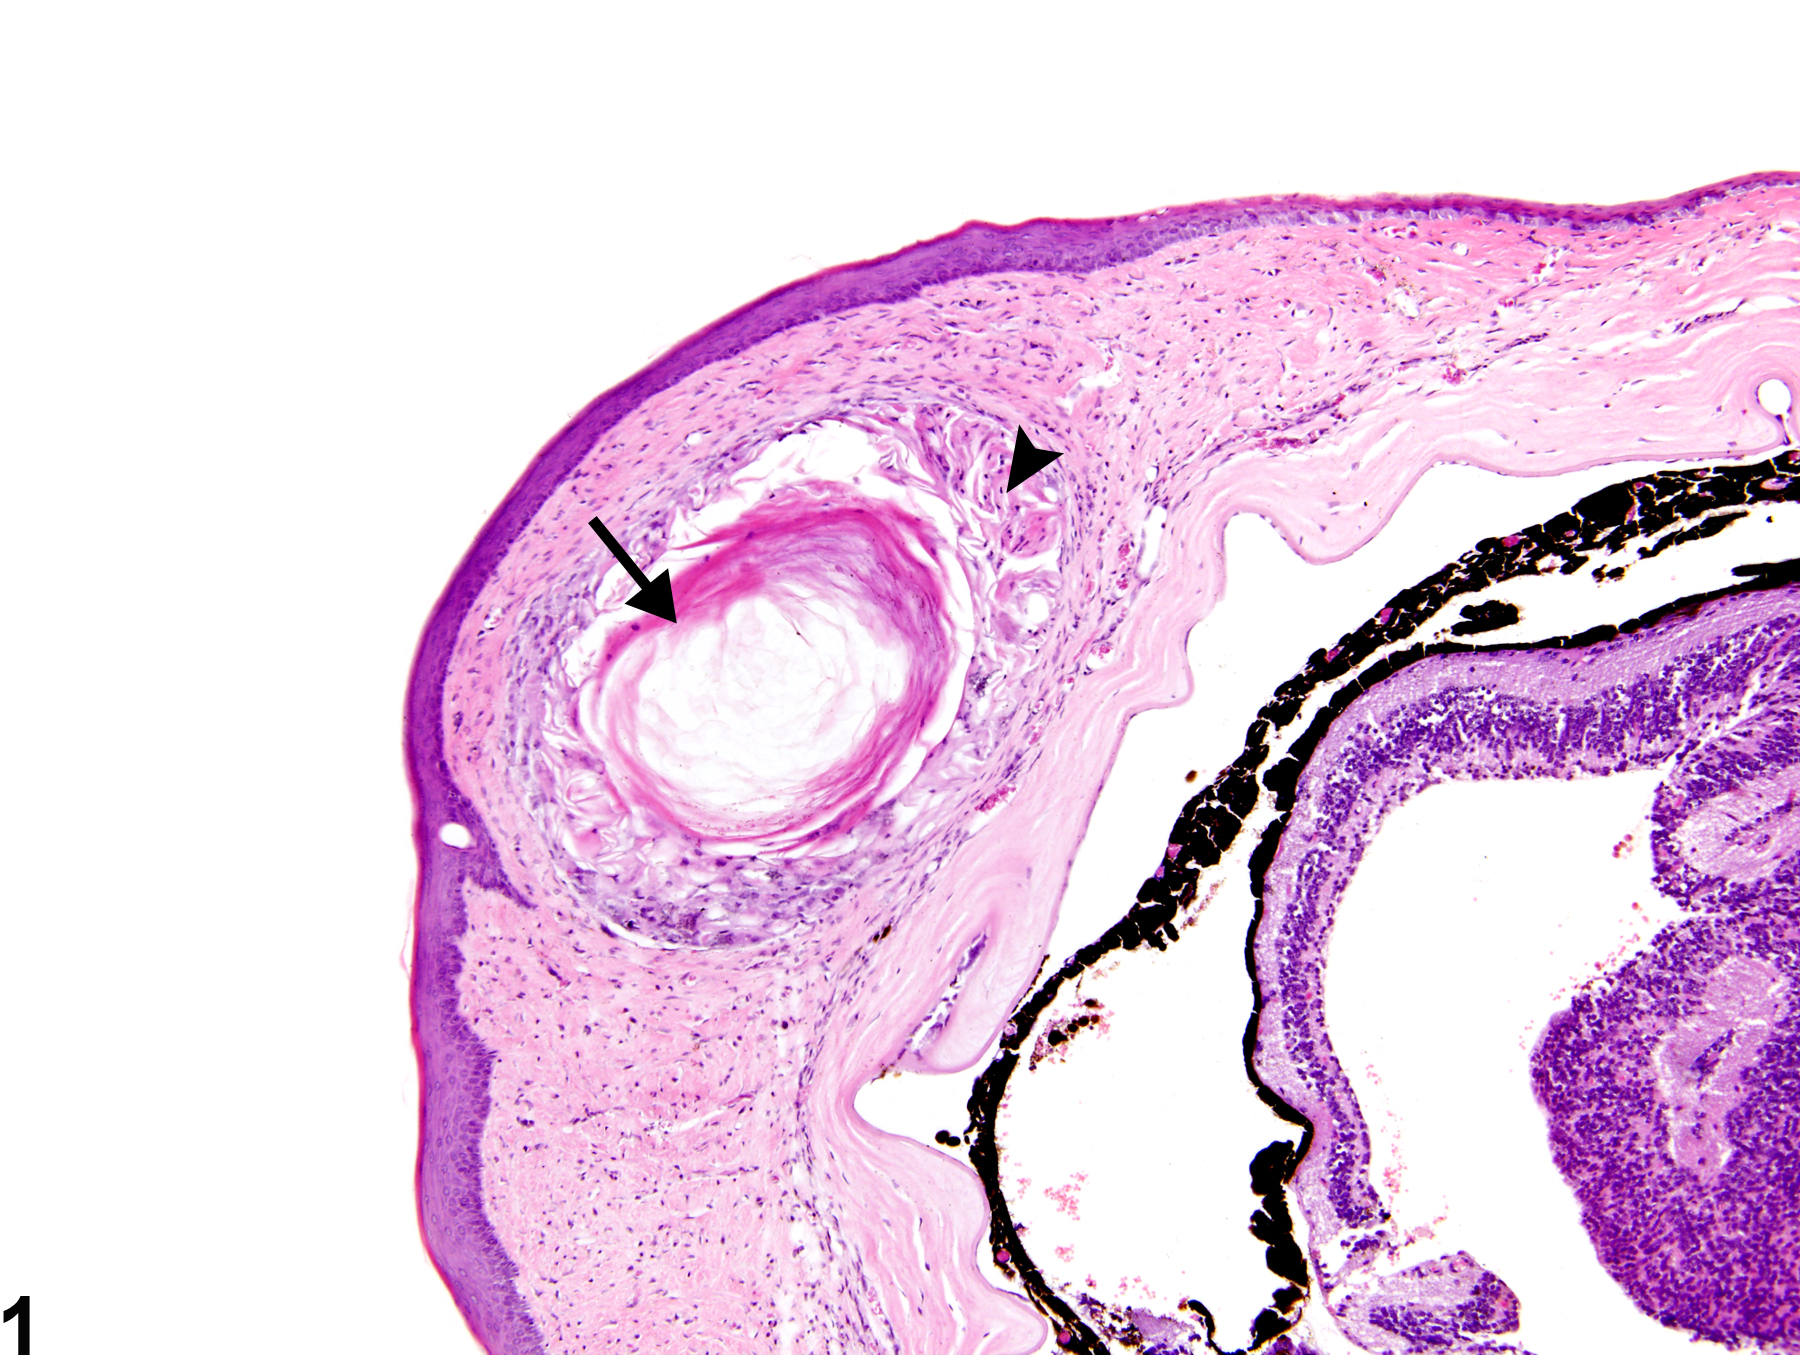 Image of cornea cyst in the eye from a male B6C3F1 mouse in a chronic study